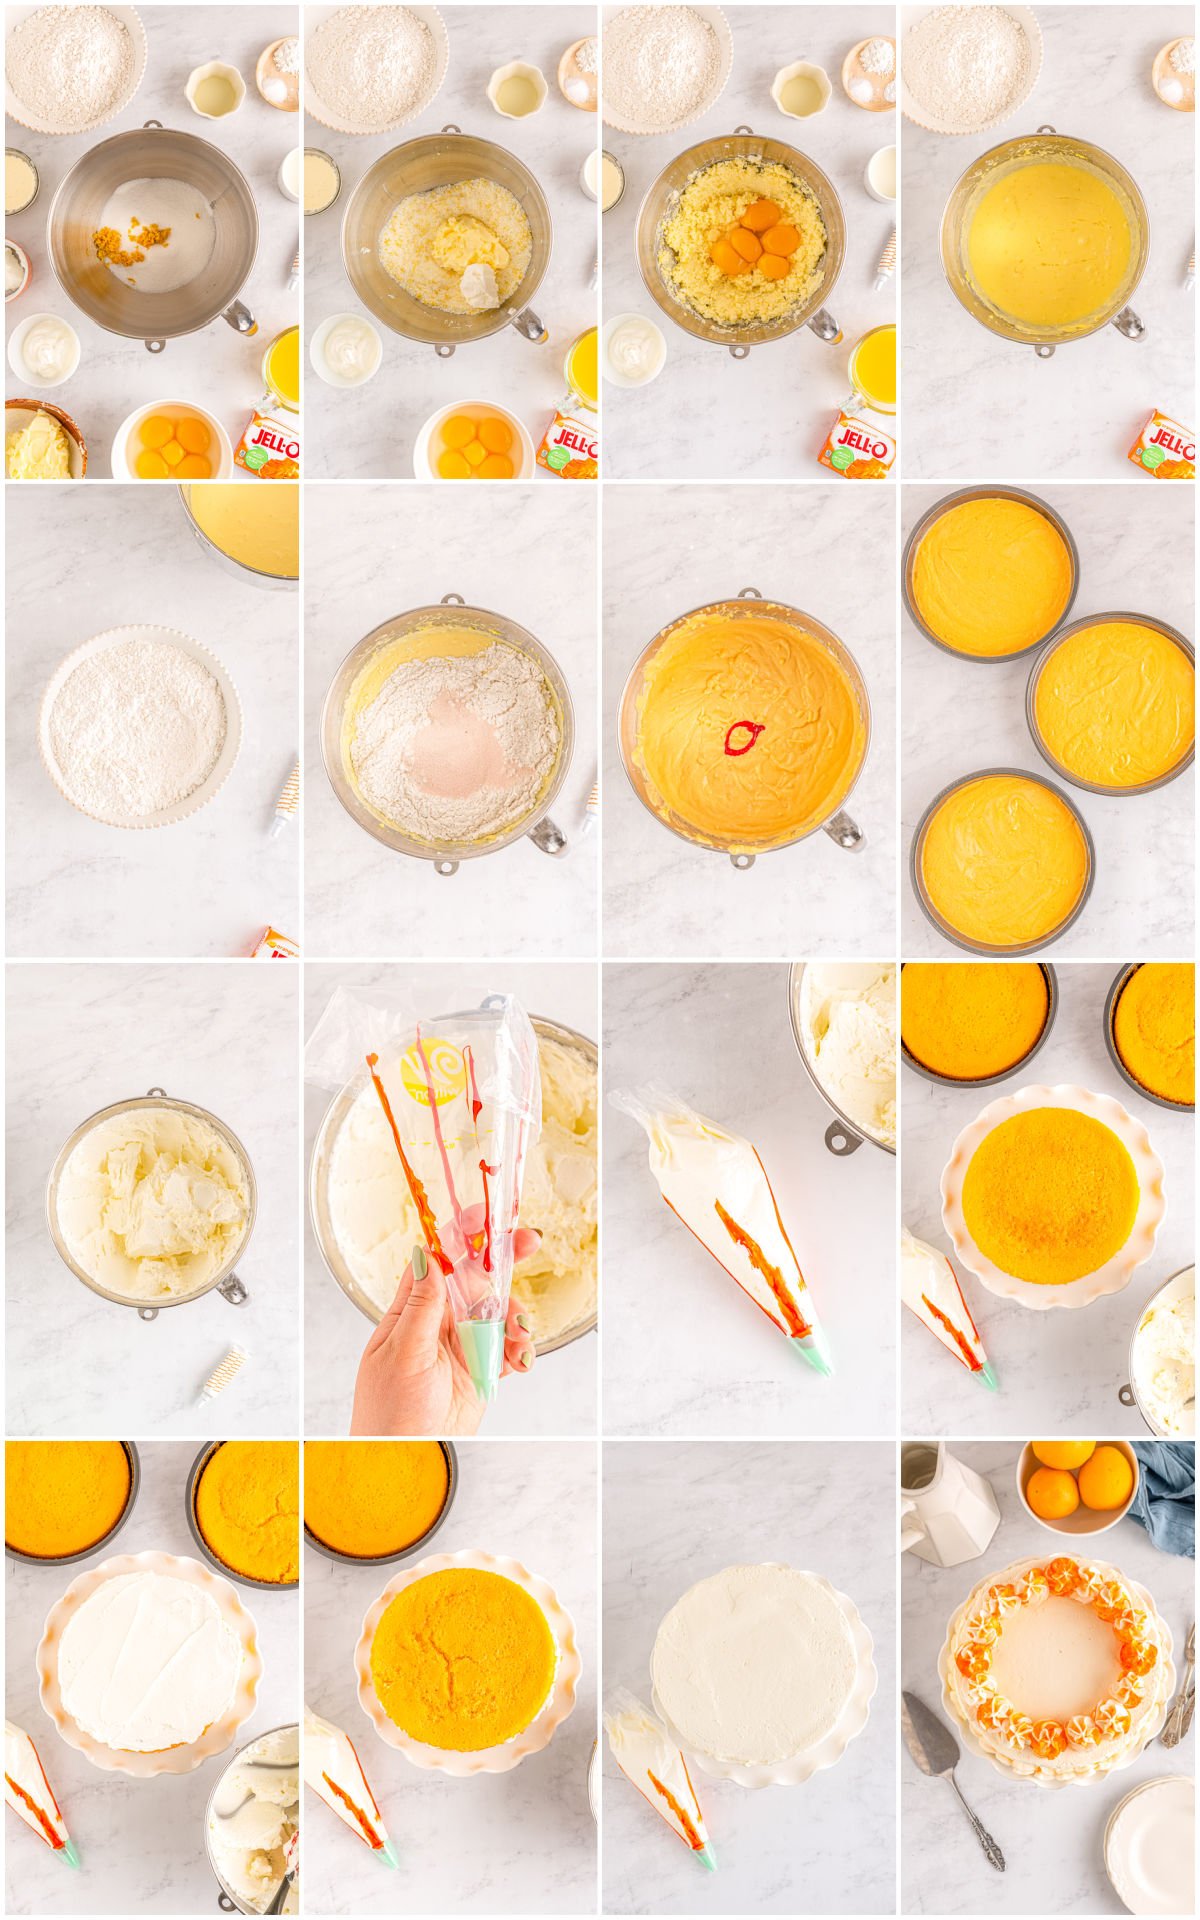 A picture collage showing how to make this amazing Orange Creamsicle Cake recipe.